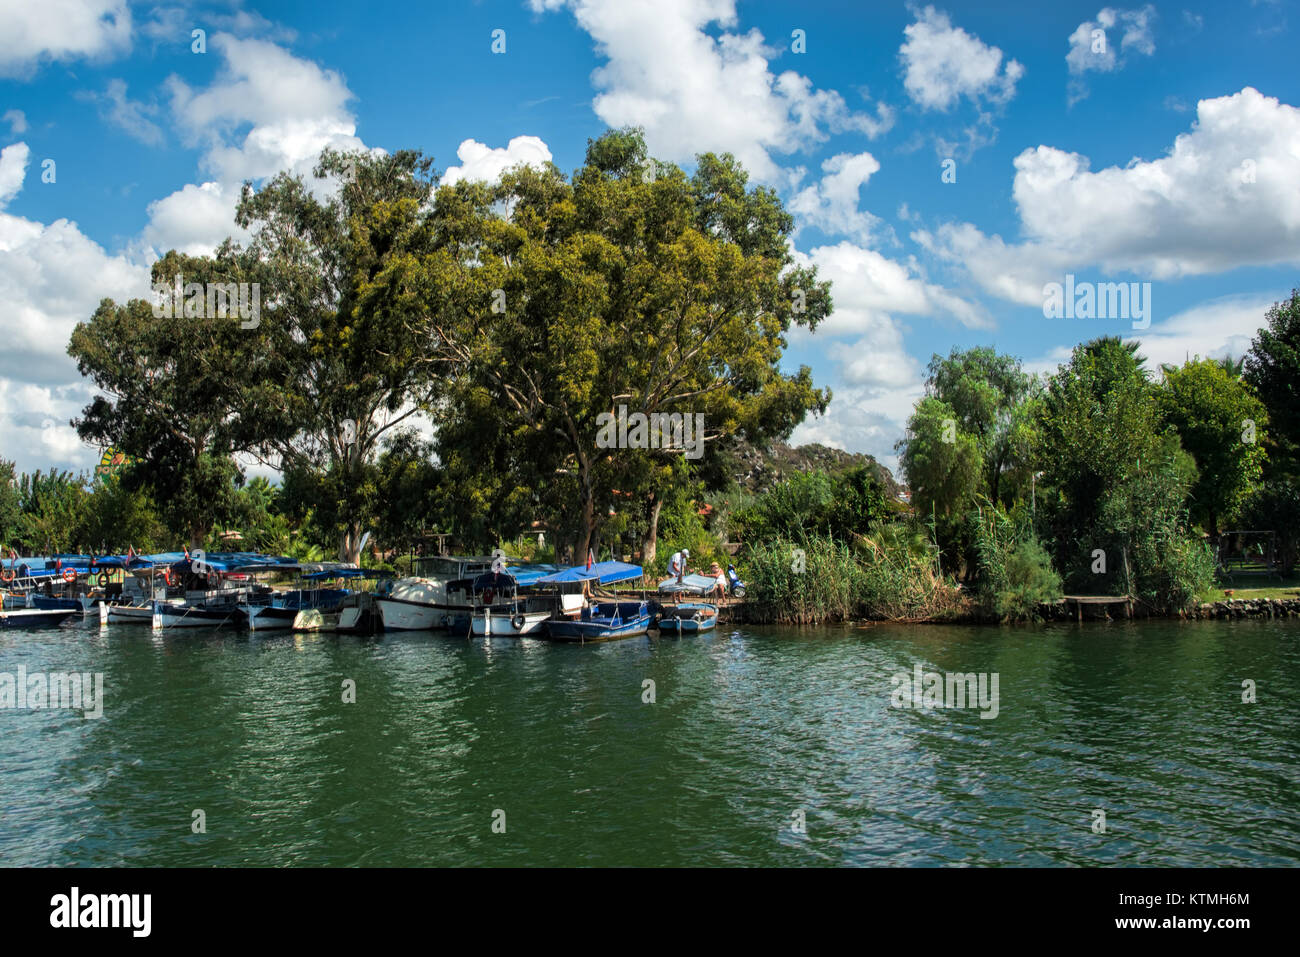 Boats tied to shore under a big green tree on lake with green reeds under blue skies with fluffy white clouds Stock Photo